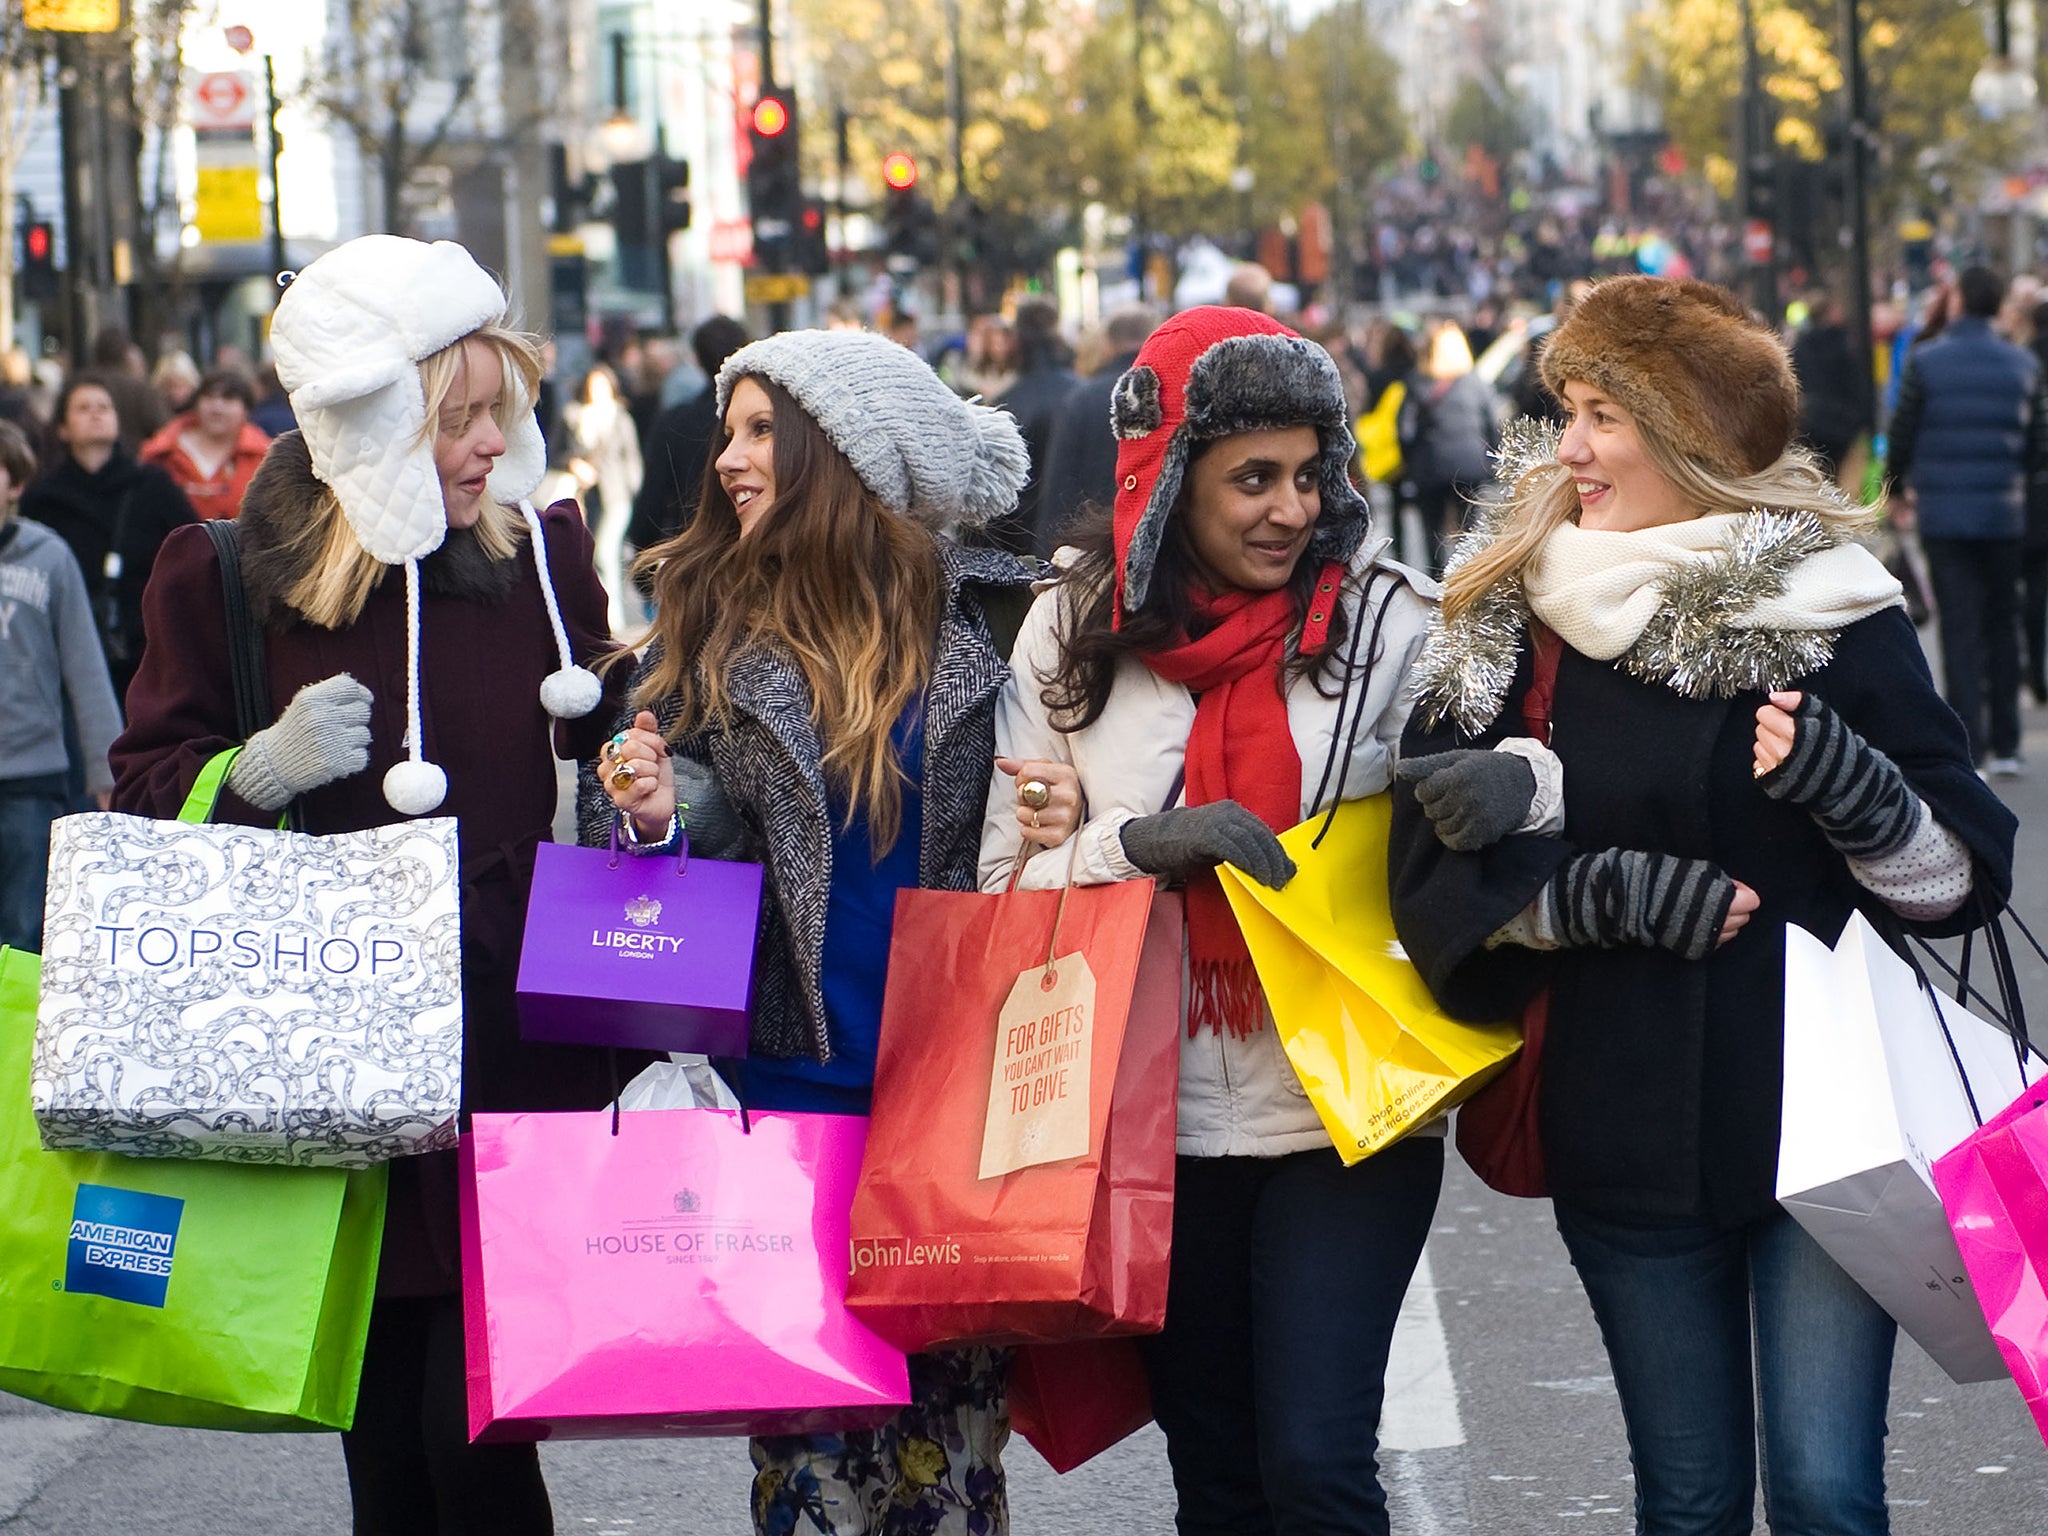 The government believes the changes are necessary to improve high street stores' chances of competing with 24-hour online shopping culture